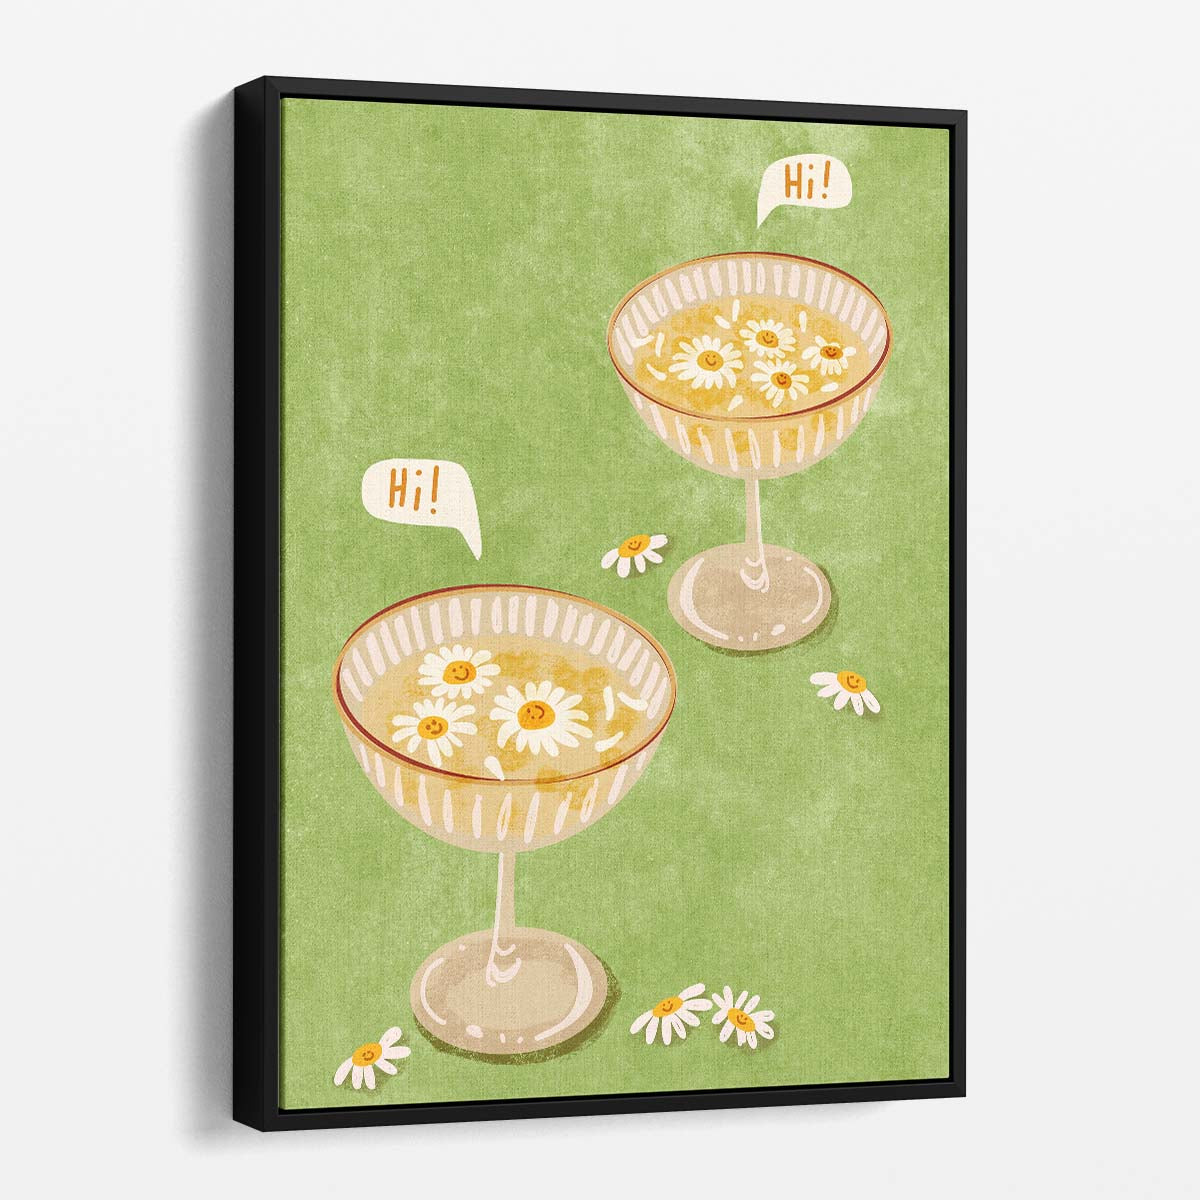 Colorful Summer Cocktail Illustration with Sunflowers Wall Art by Luxuriance Designs, made in USA